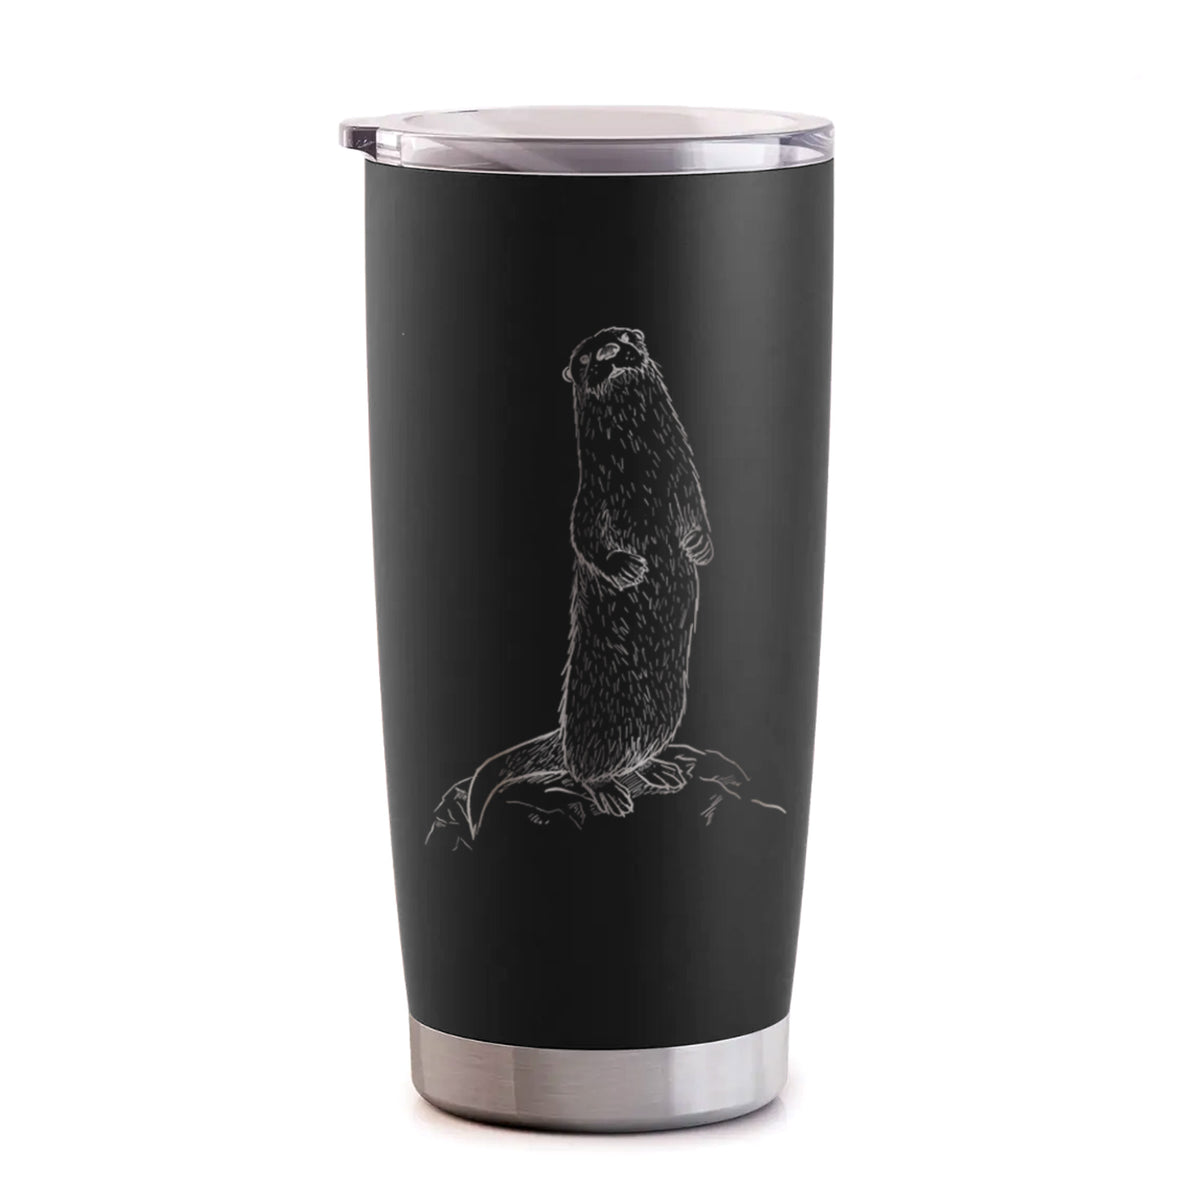 North American River Otter - Lontra canadensis - 20oz Polar Insulated Tumbler